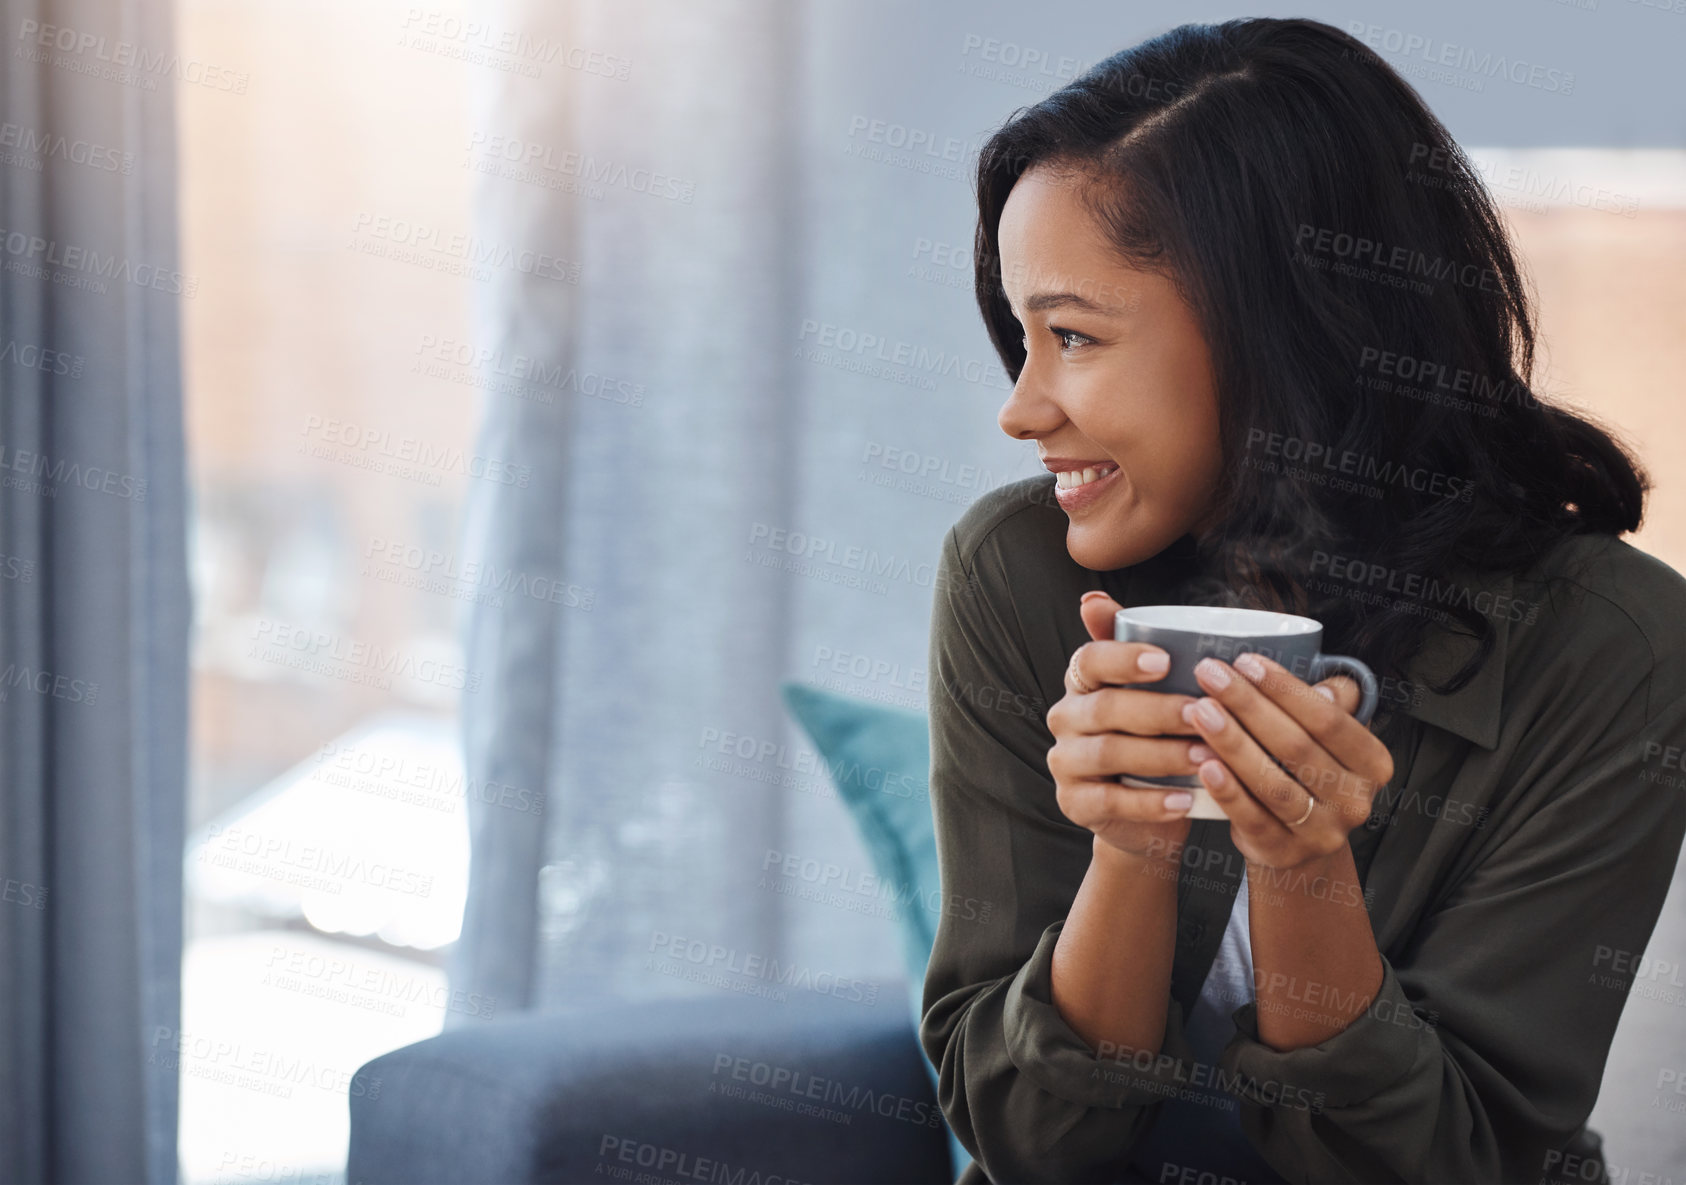 Buy stock photo Shot of an attractive young woman having coffee and relaxing on the sofa at home